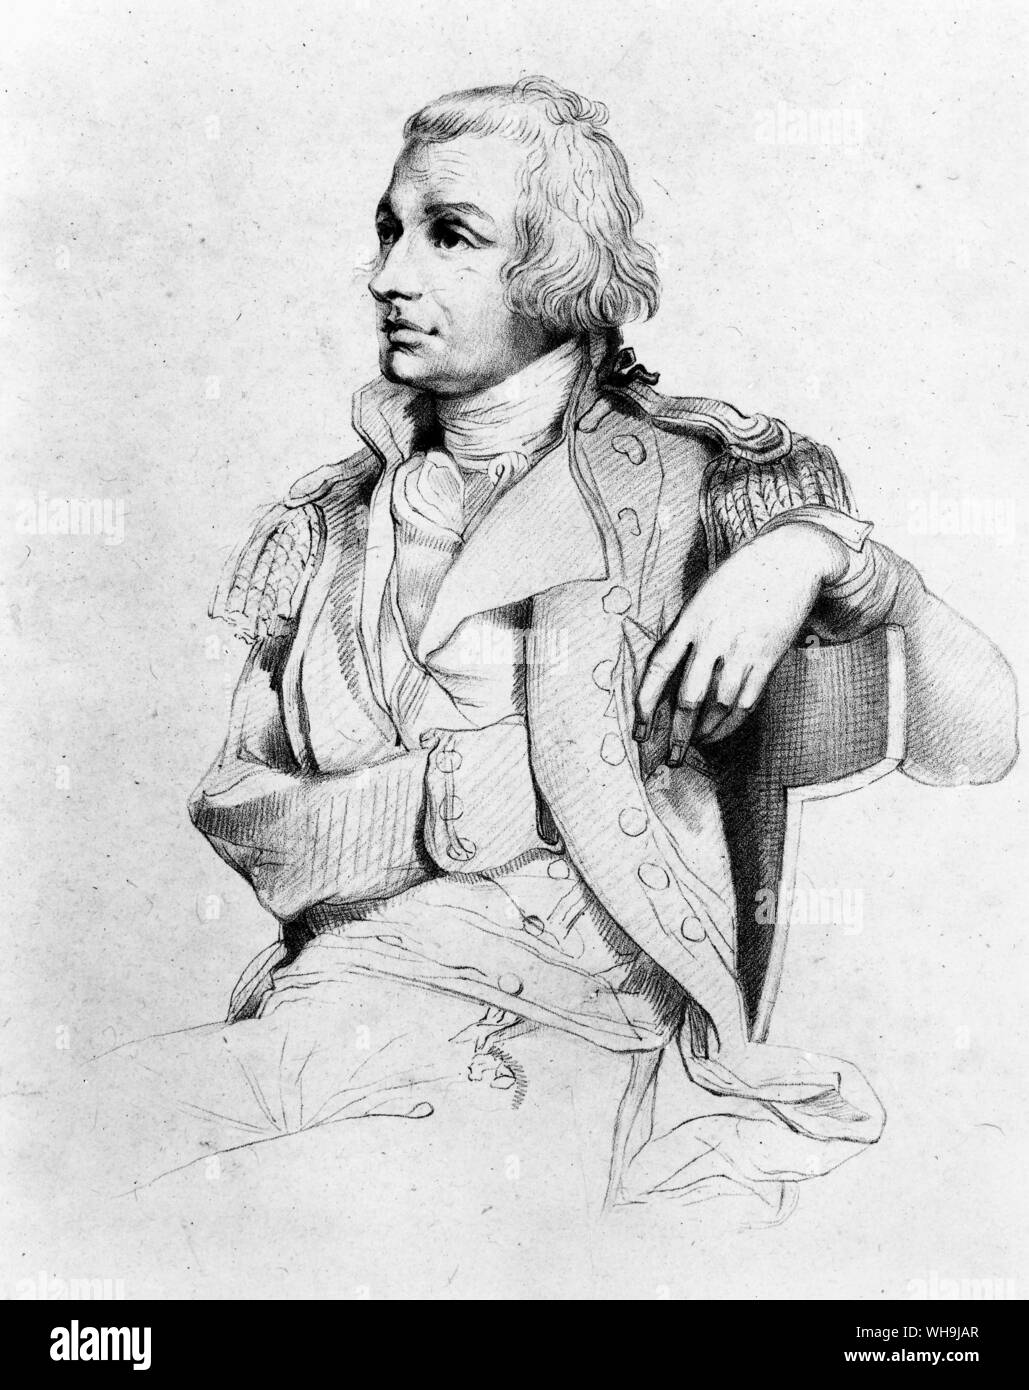 L'amiral Lord Horatio Nelson (10 Downing Street) par C. Grignion, 1797. Banque D'Images